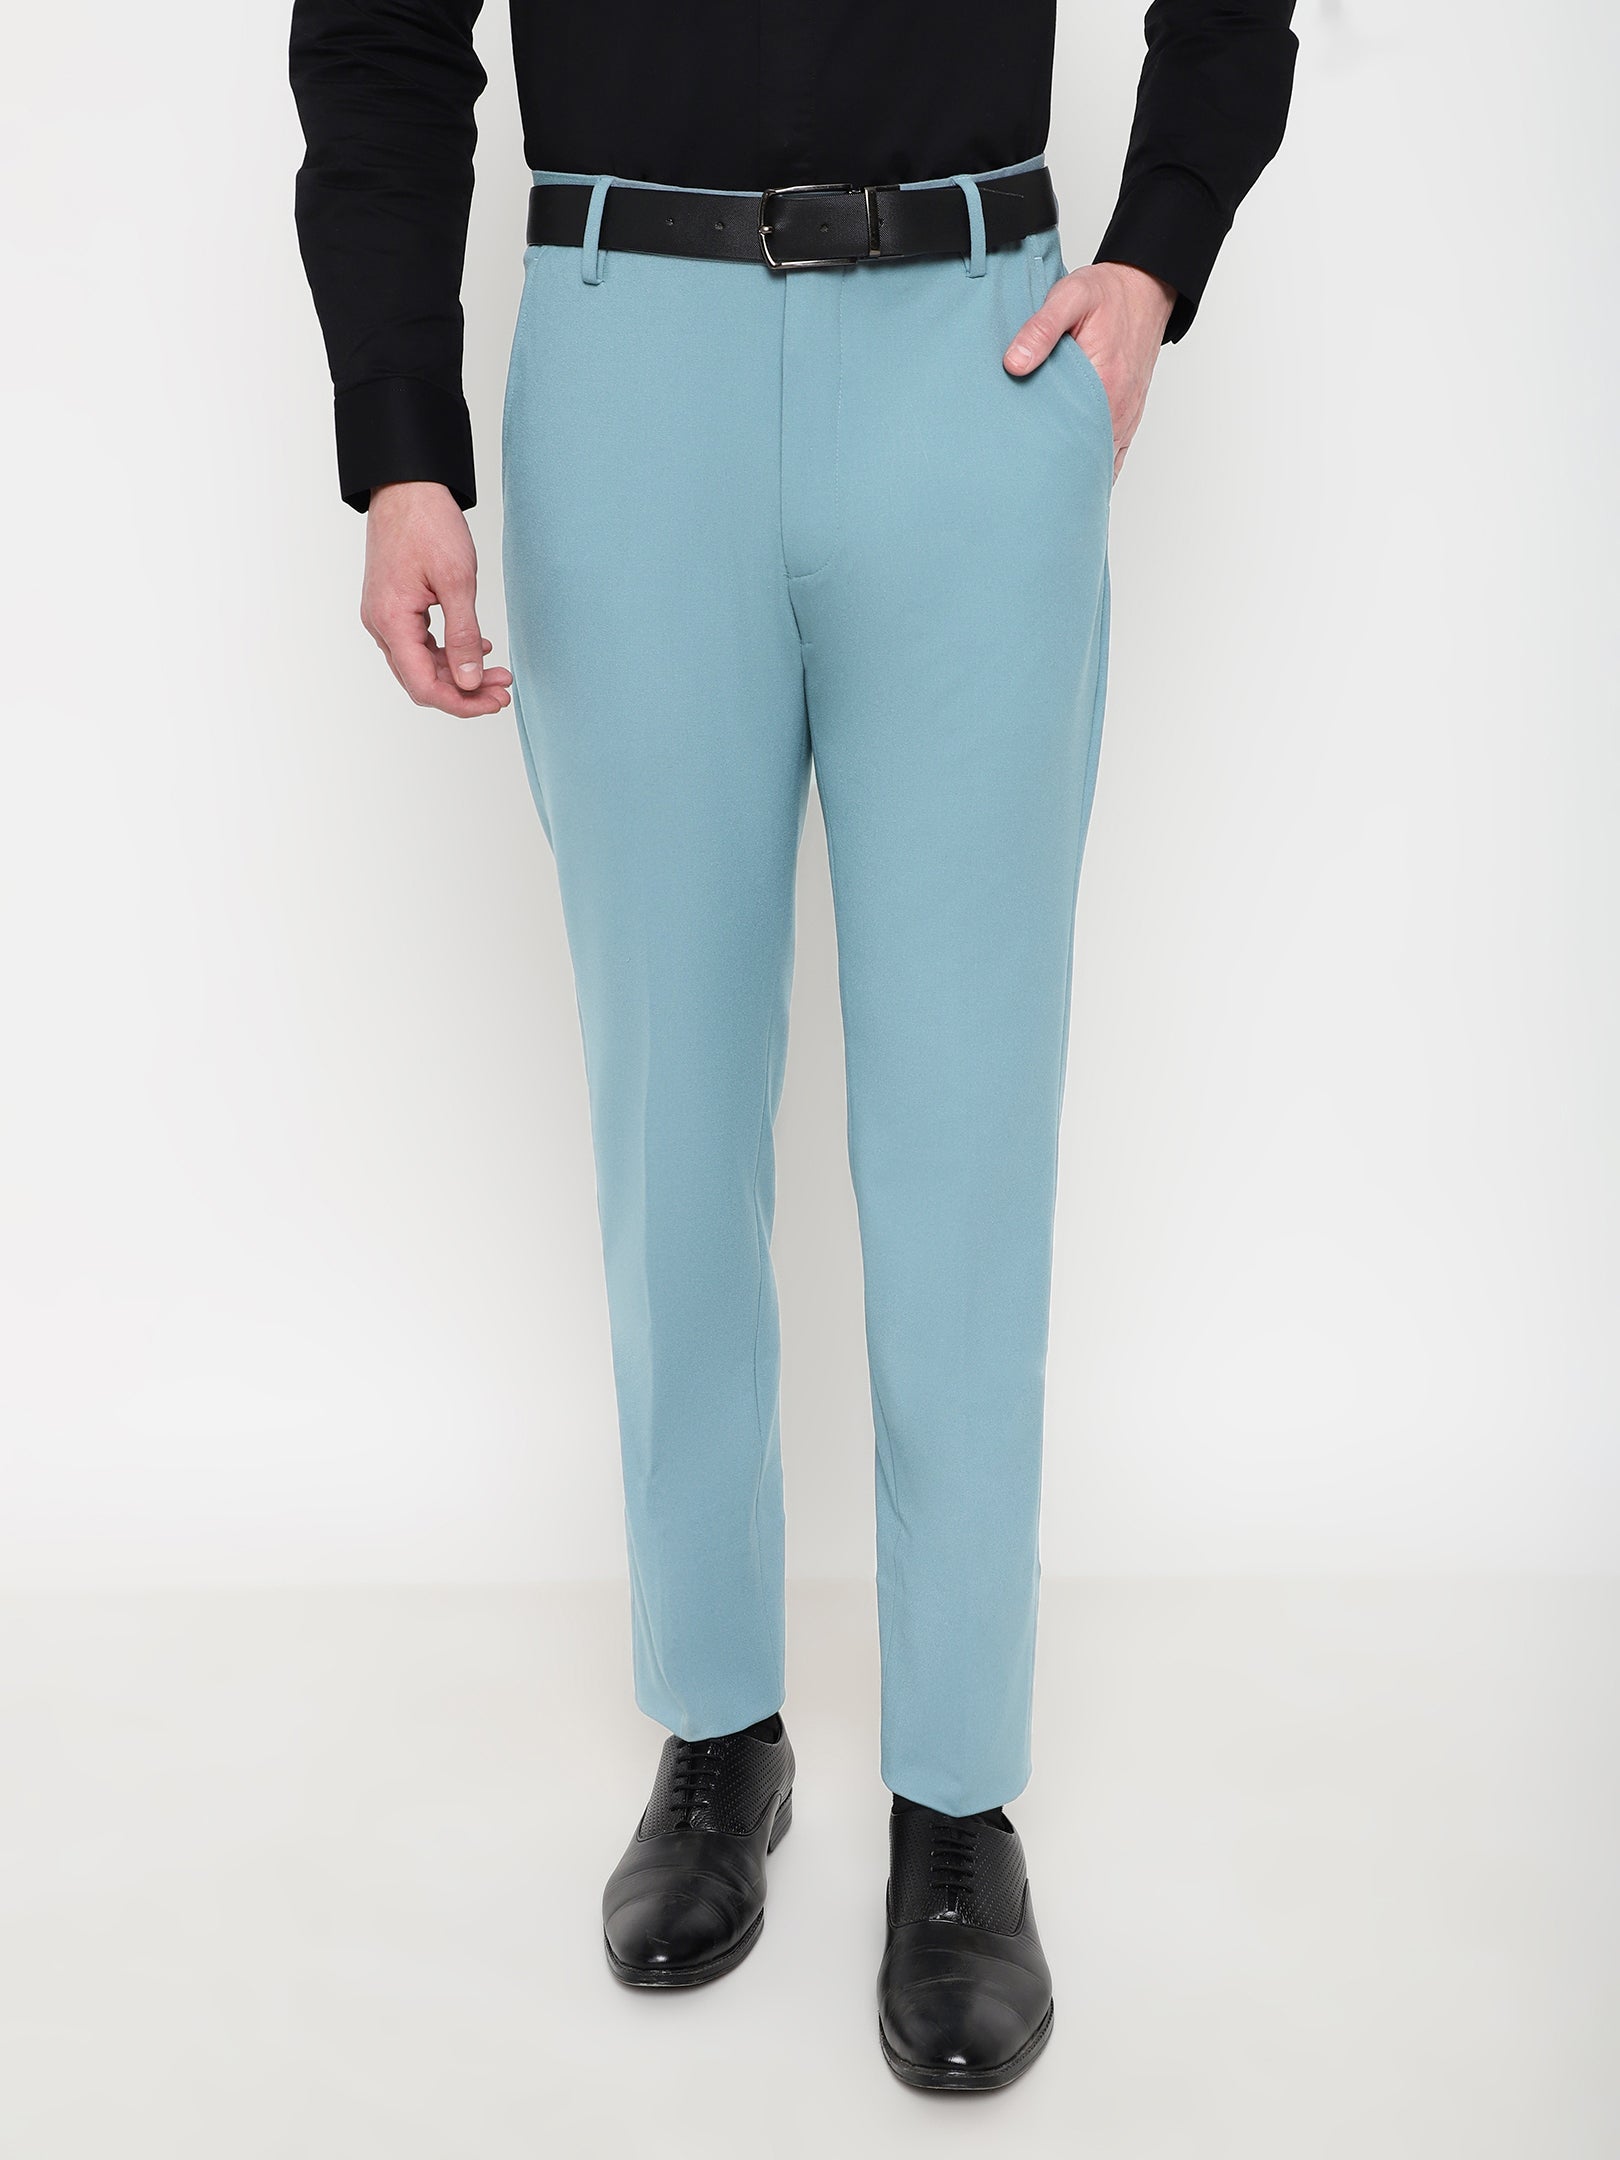 Shop Stylish Cream Stretchable formal Pants for Mens Online